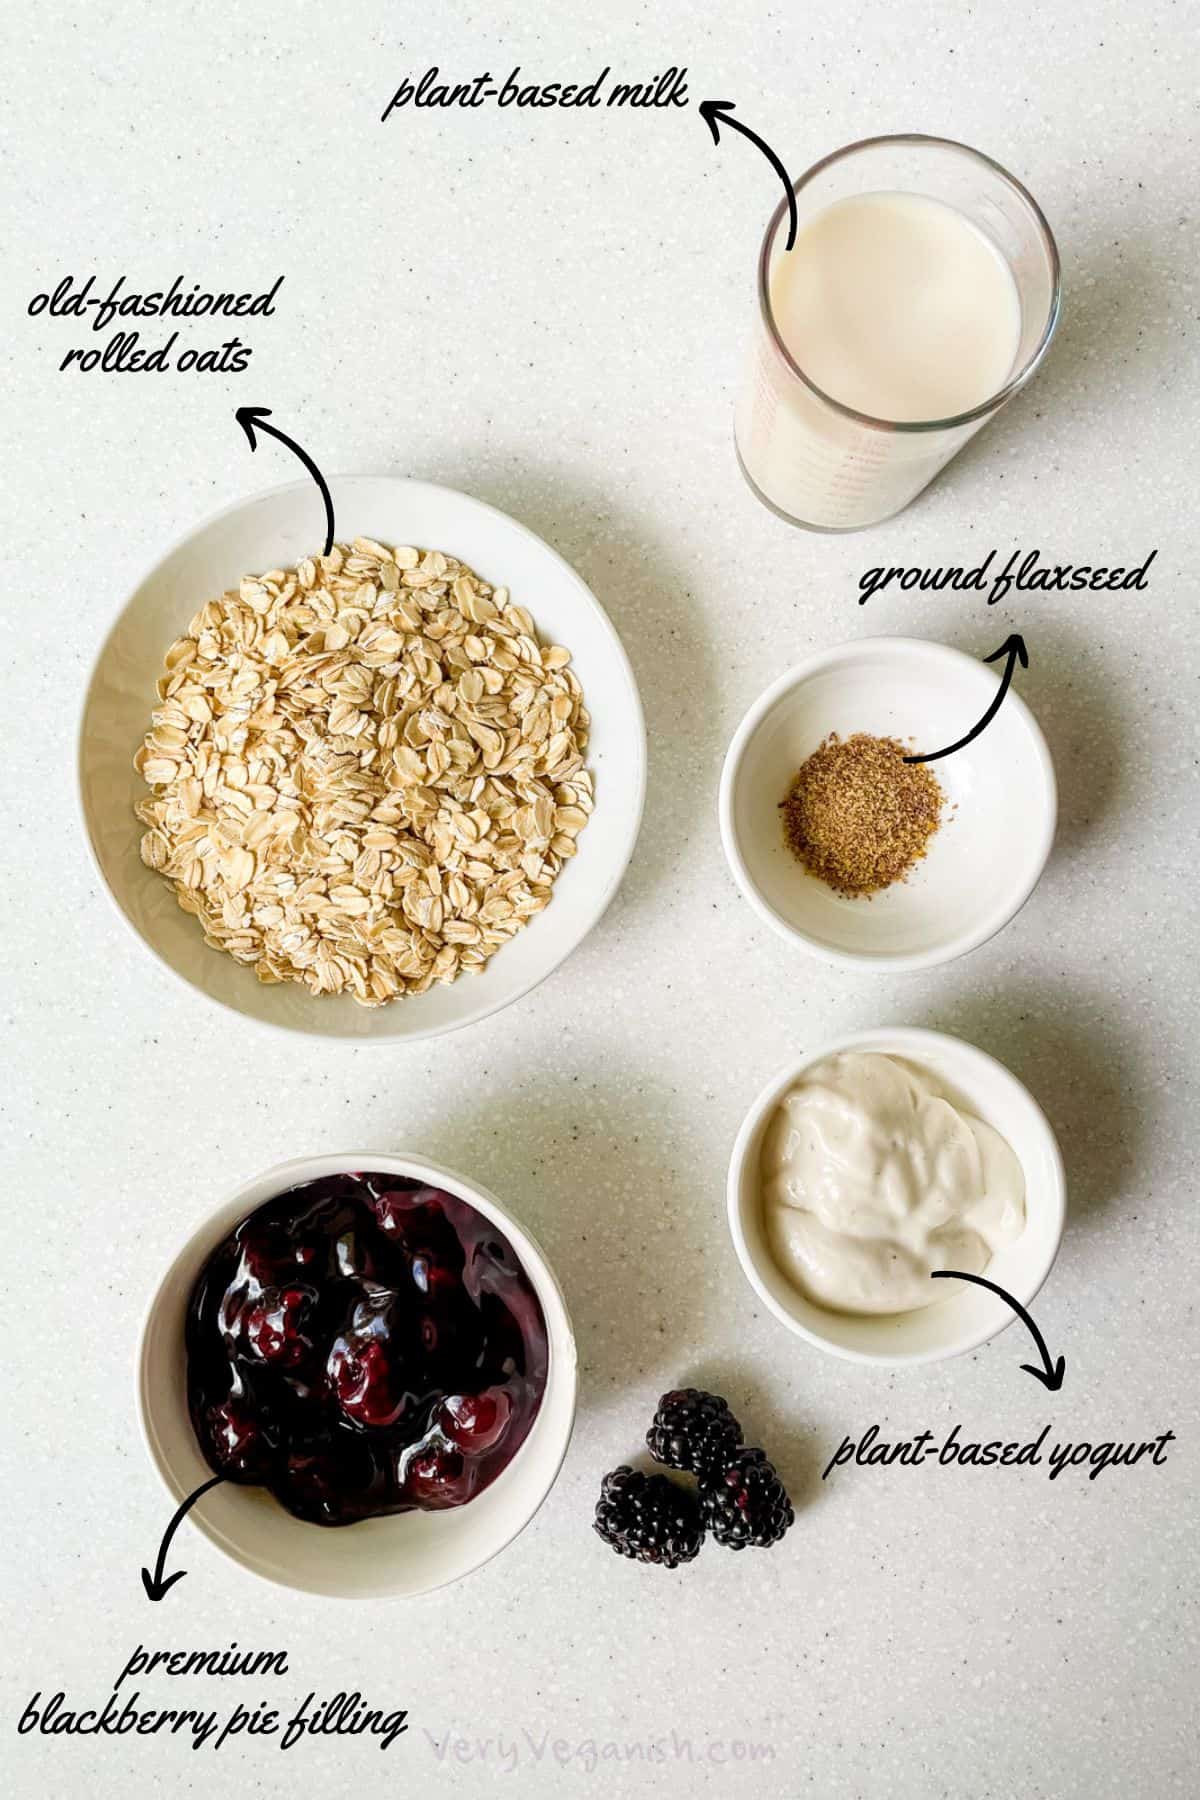 Ingredients for blackberry pie overnight oats: rolled oats, plant-based milk, ground flaxseed, plant-based yogurt, premium blackberry pie filling